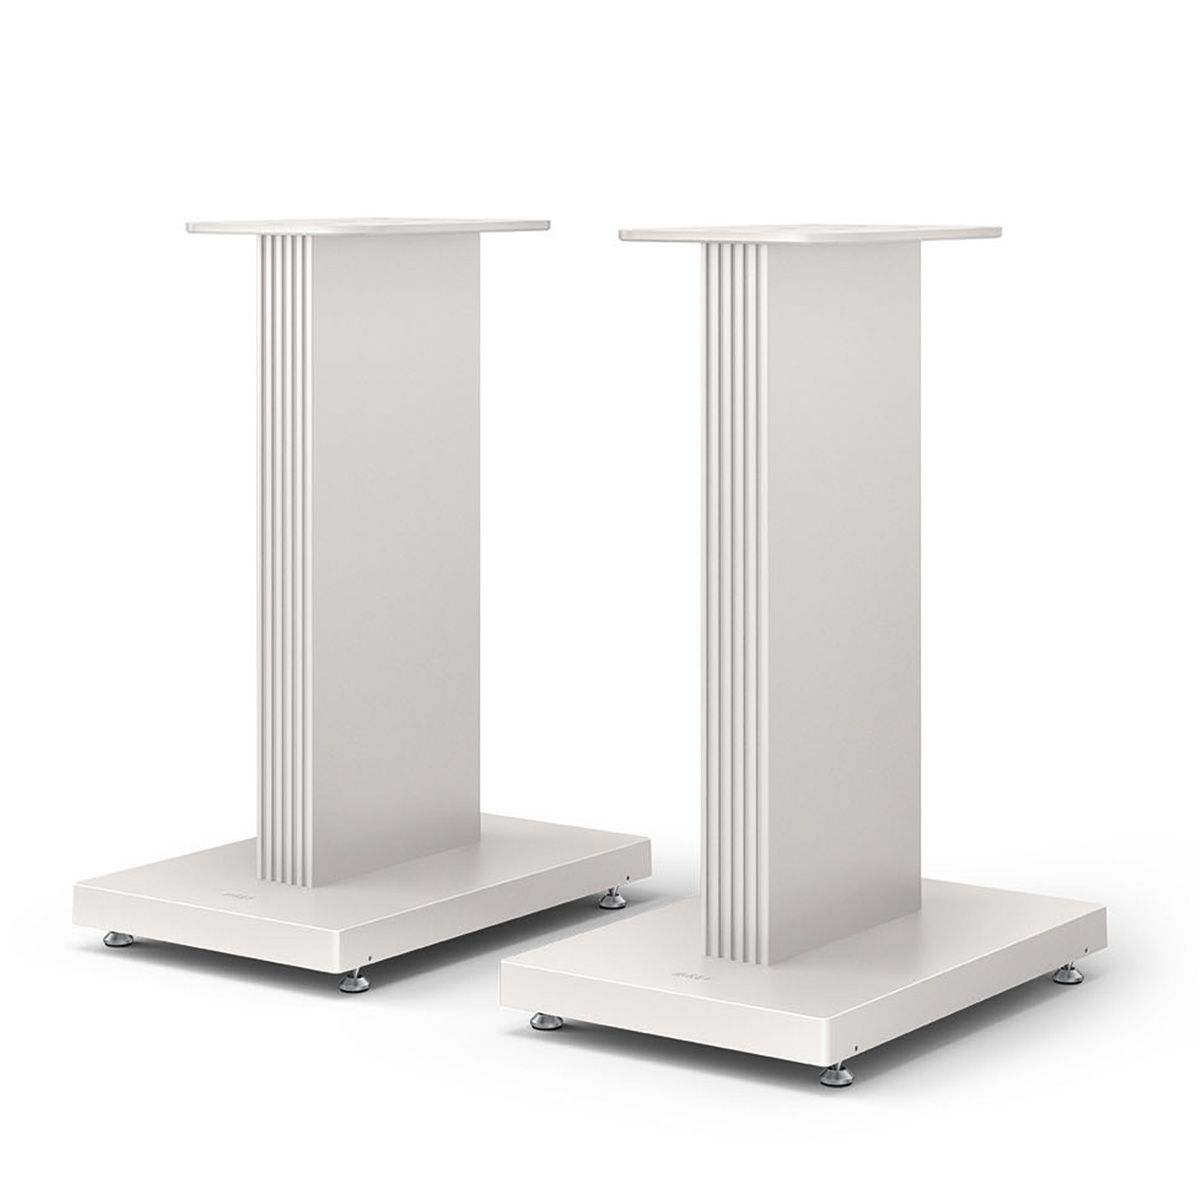 KEF S3 Floor Stands - Pair white angled front view